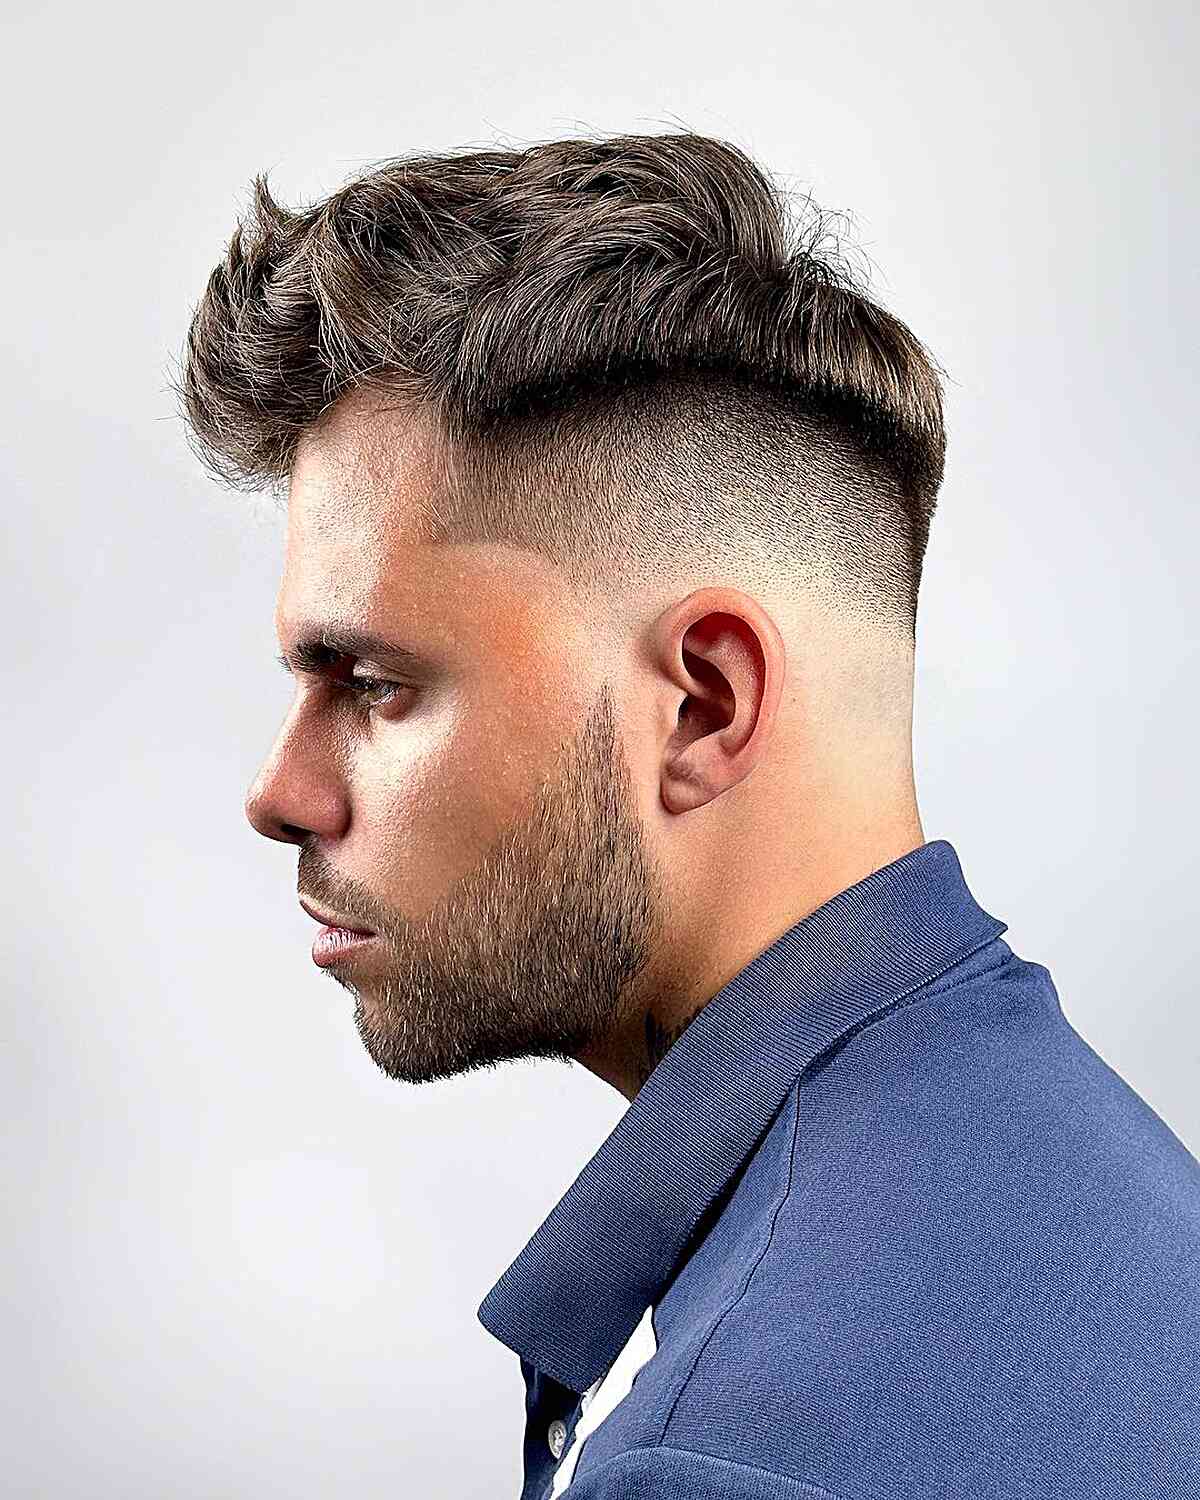 New Hairstyle For Men \ New Hair tyle fashion 2022 : u/wchhami55